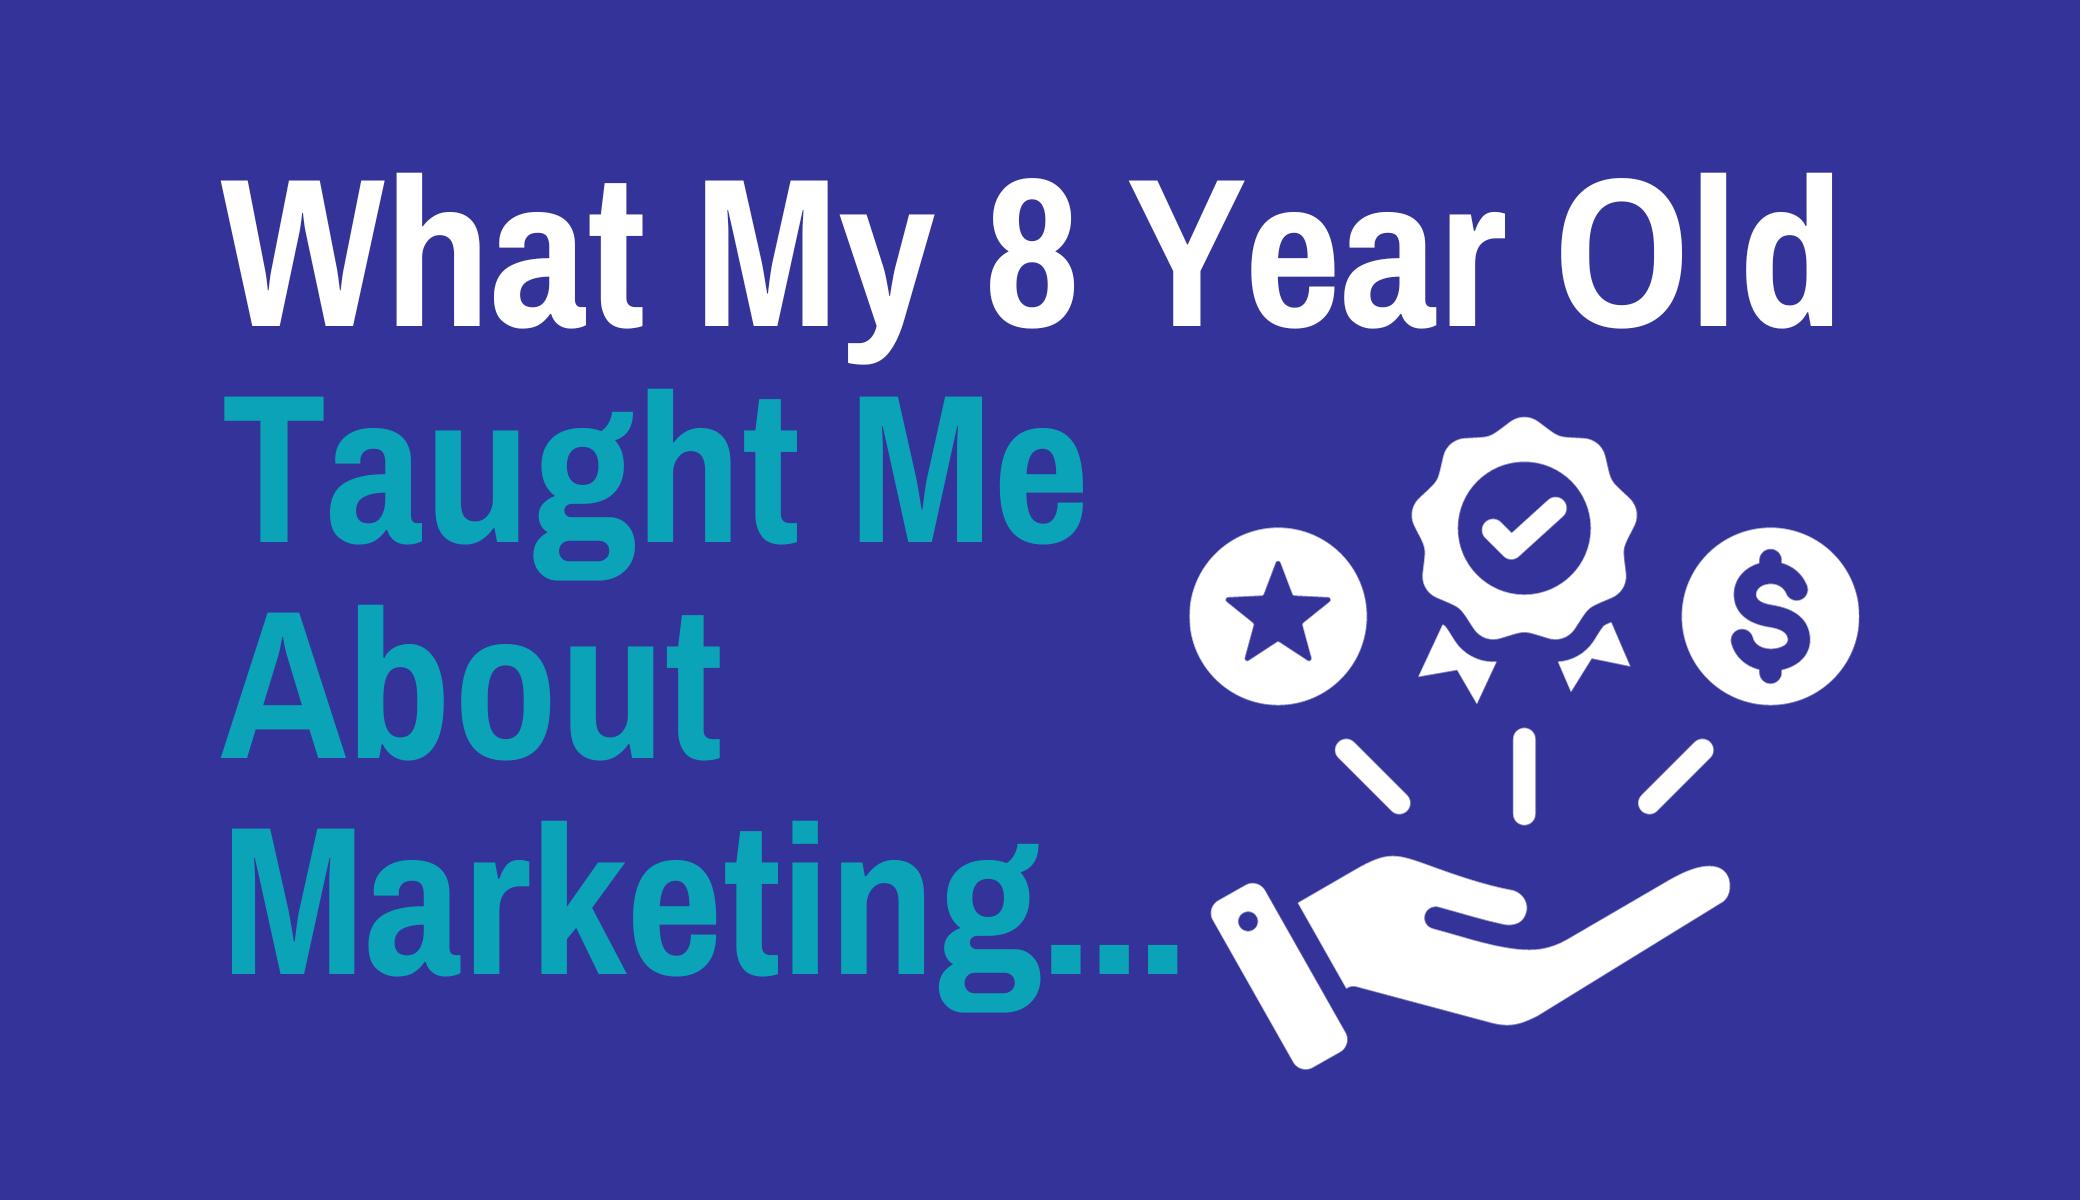 What My 8 Year Old Taught Me About Marketing